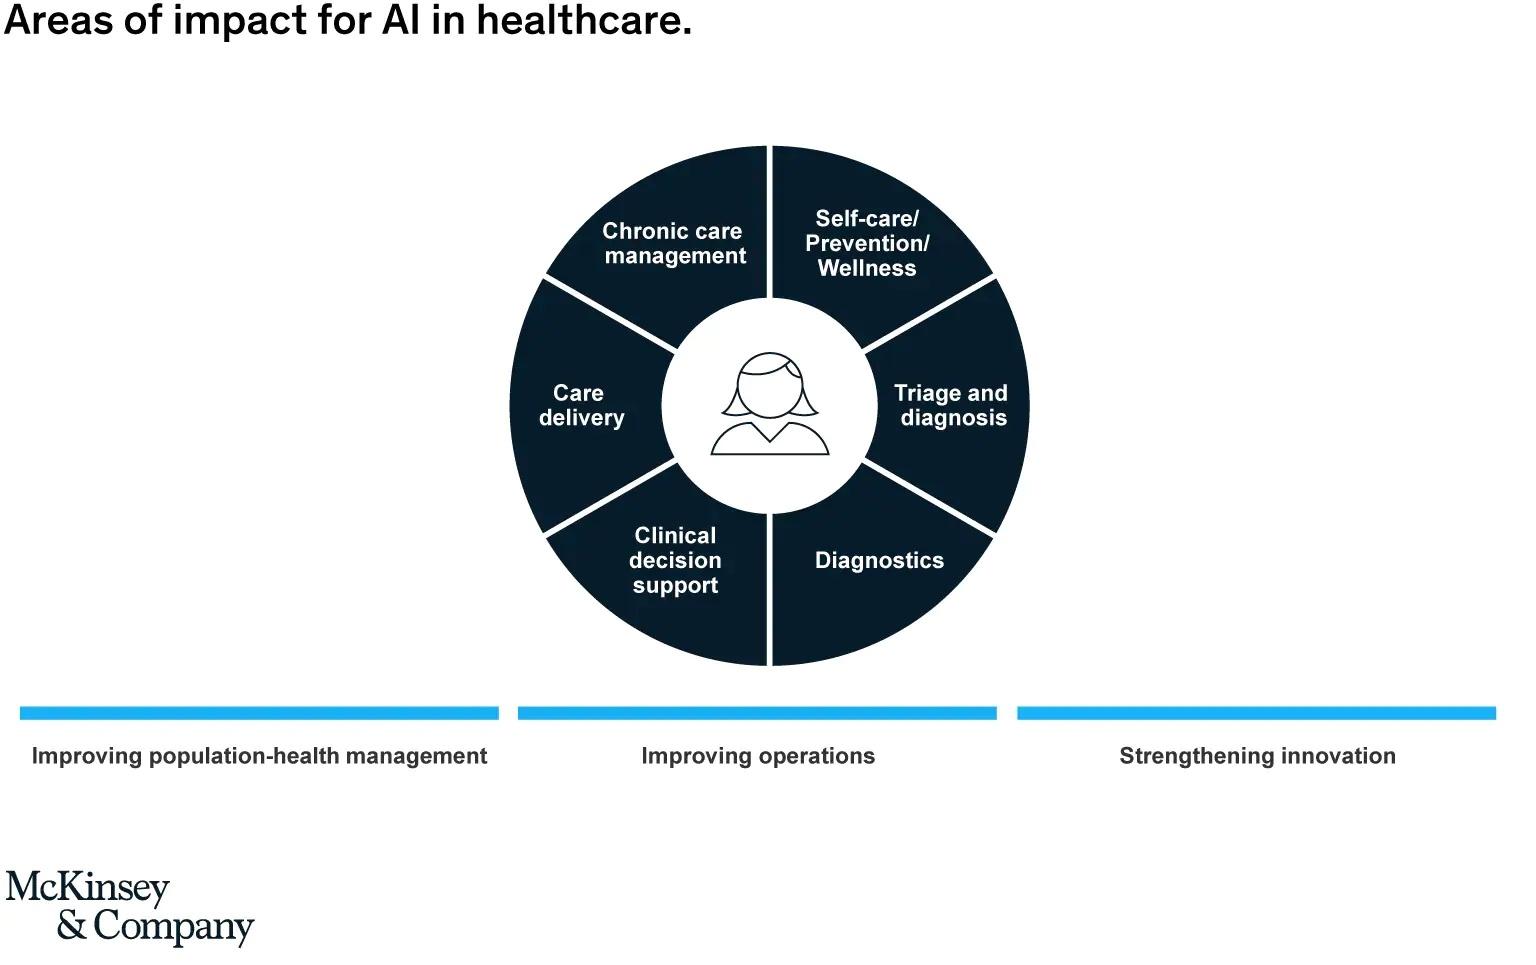 Areas_of_Impact_of_AI_in_Healthcare.jpg